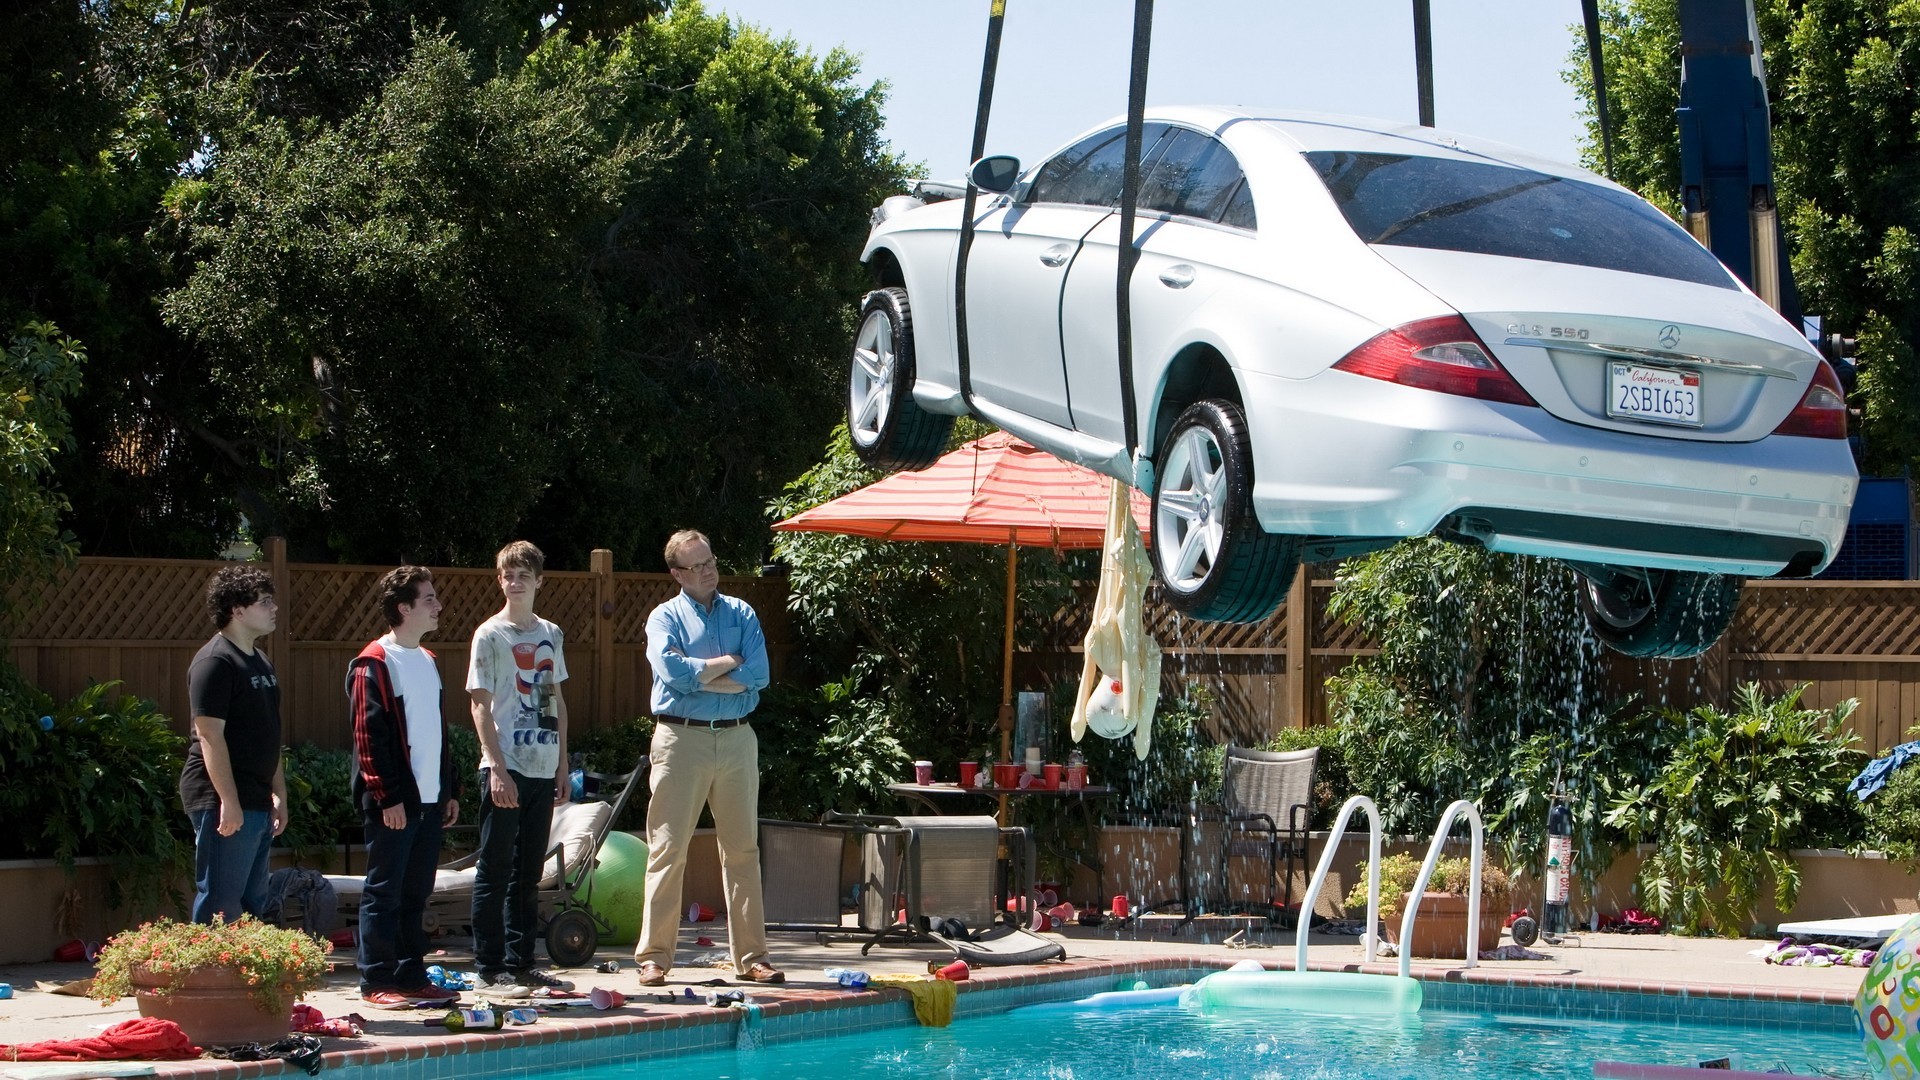 People 1920x1080 Project X movies swimming pool car vehicle numbers Mercedes-Benz humor